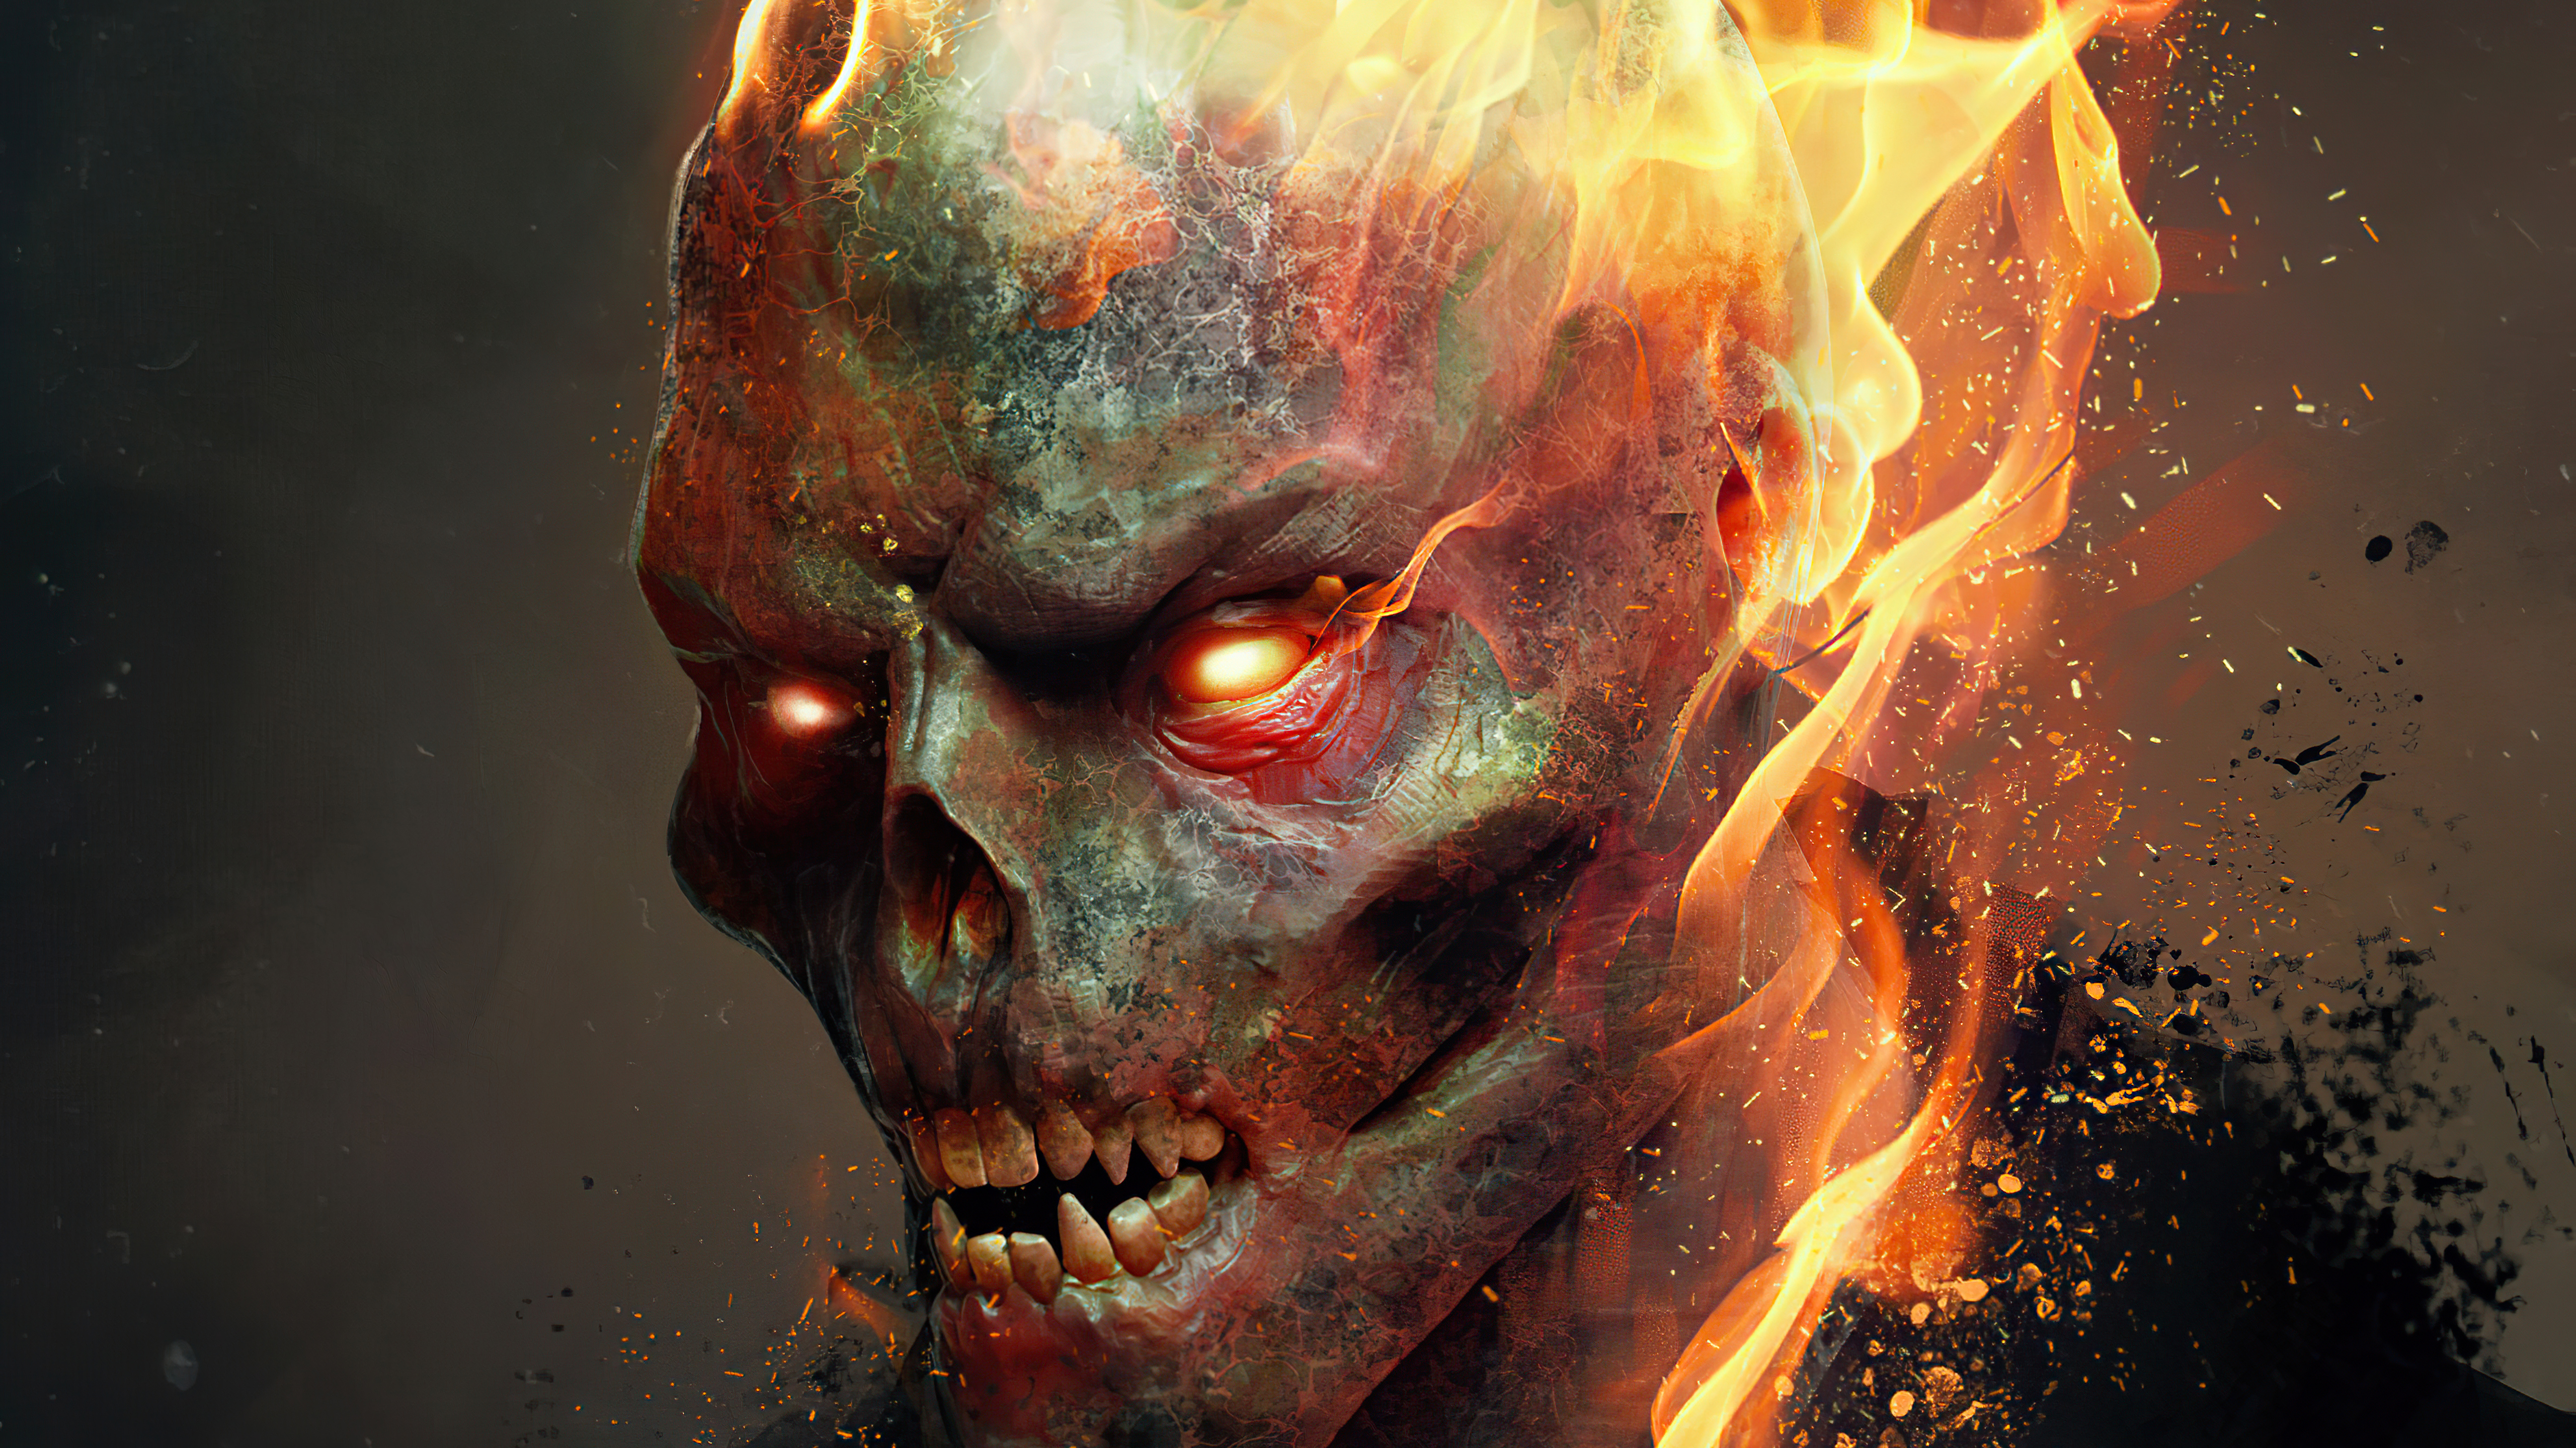 Comics Ghost Rider 4k Ultra HD Wallpaper by Marcus Whinney